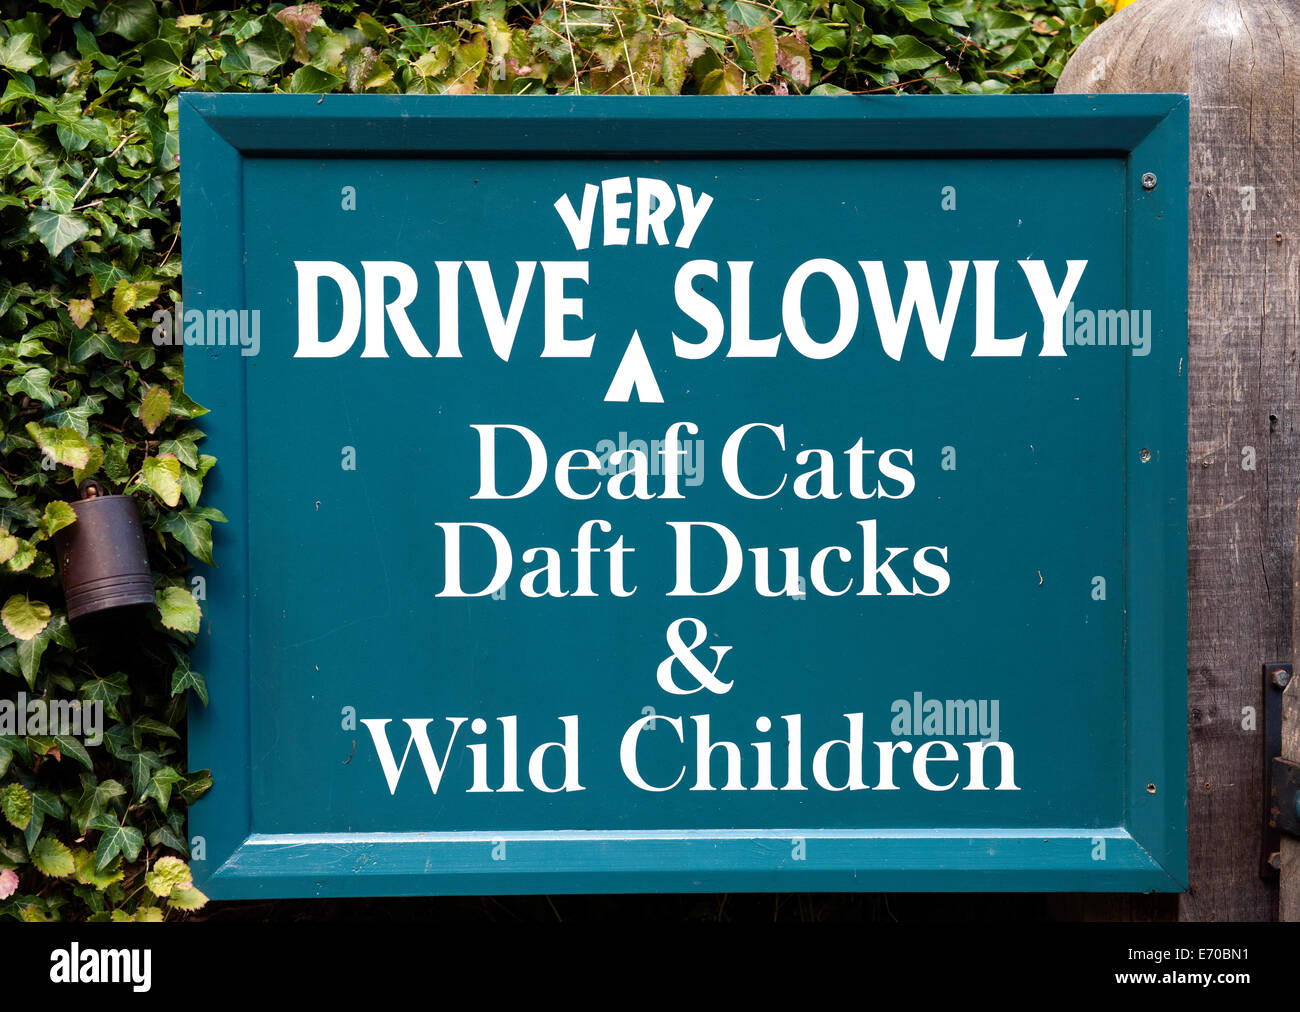 Warning sign for motorists to drive very slowly. Stock Photo